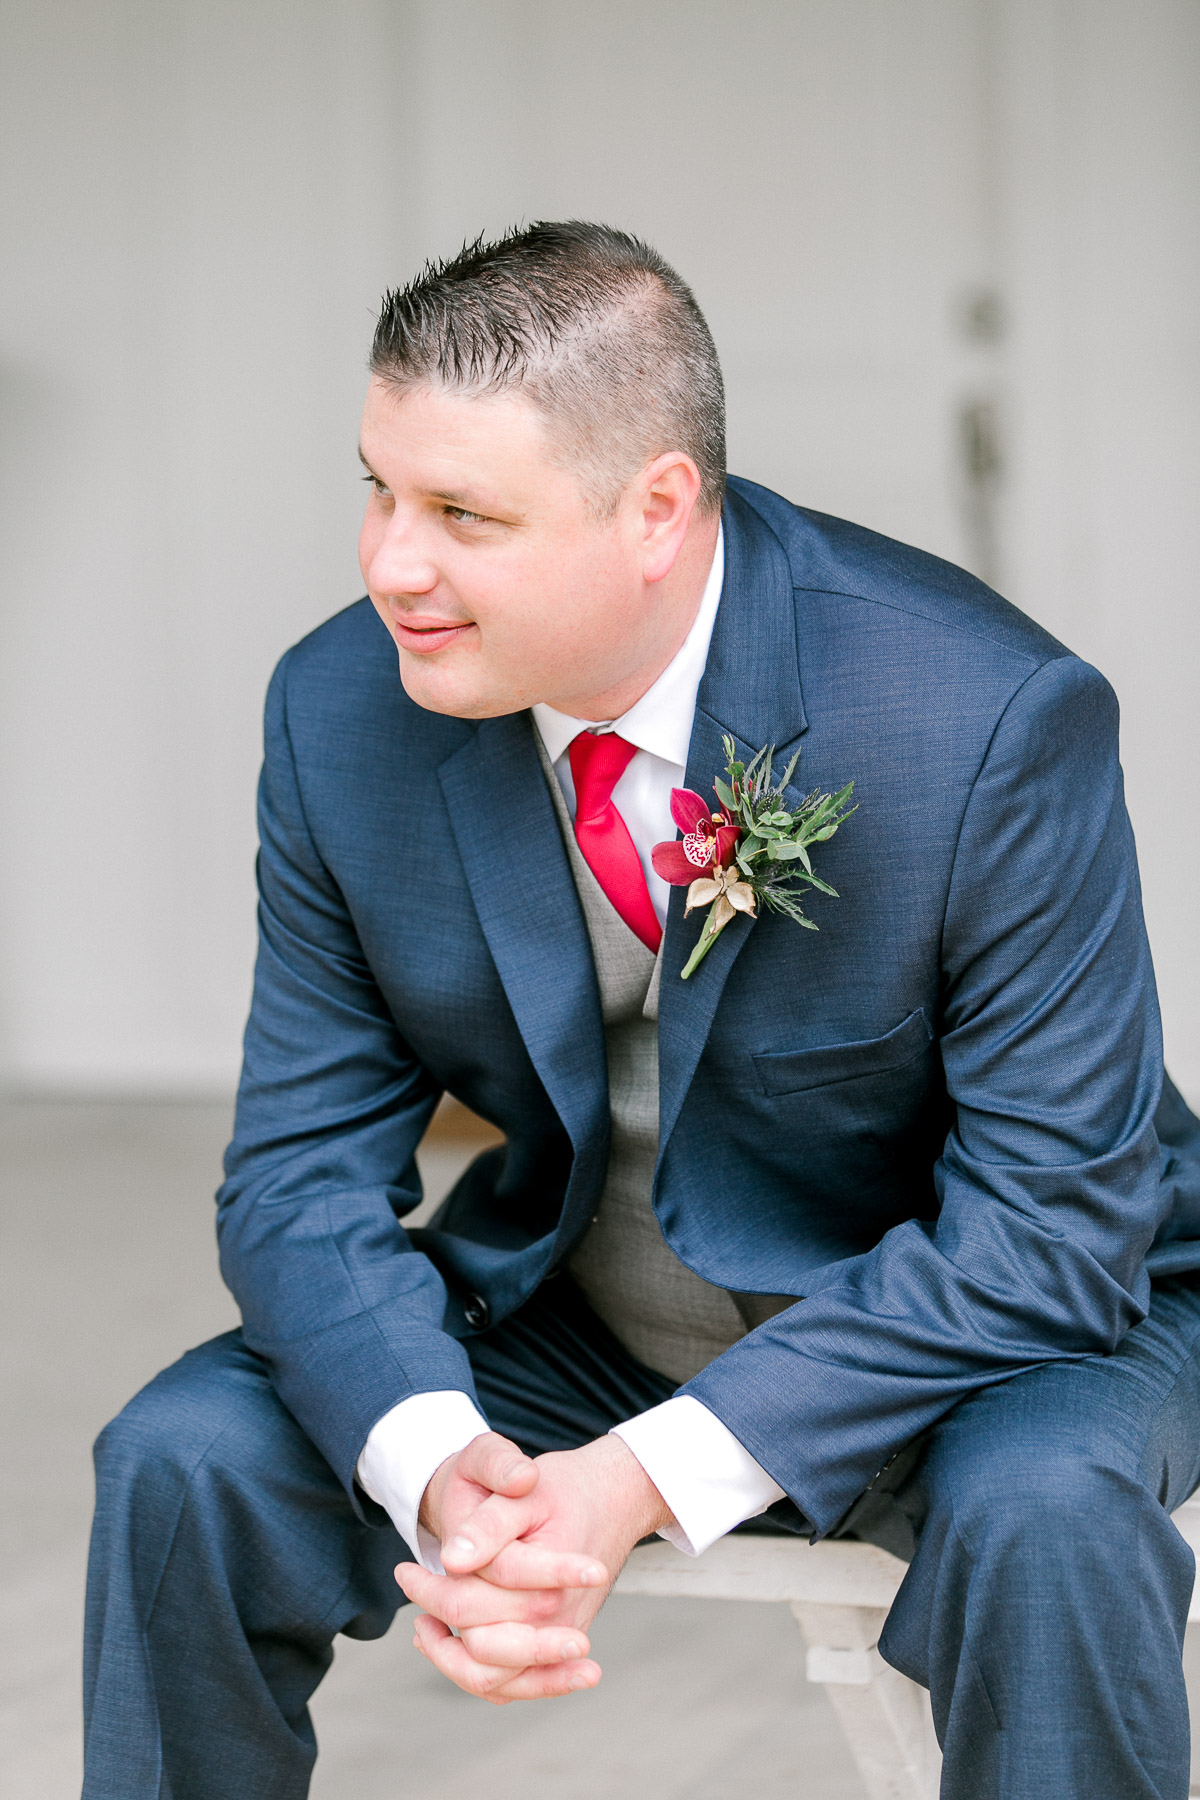 Groom in blue suit and red tie